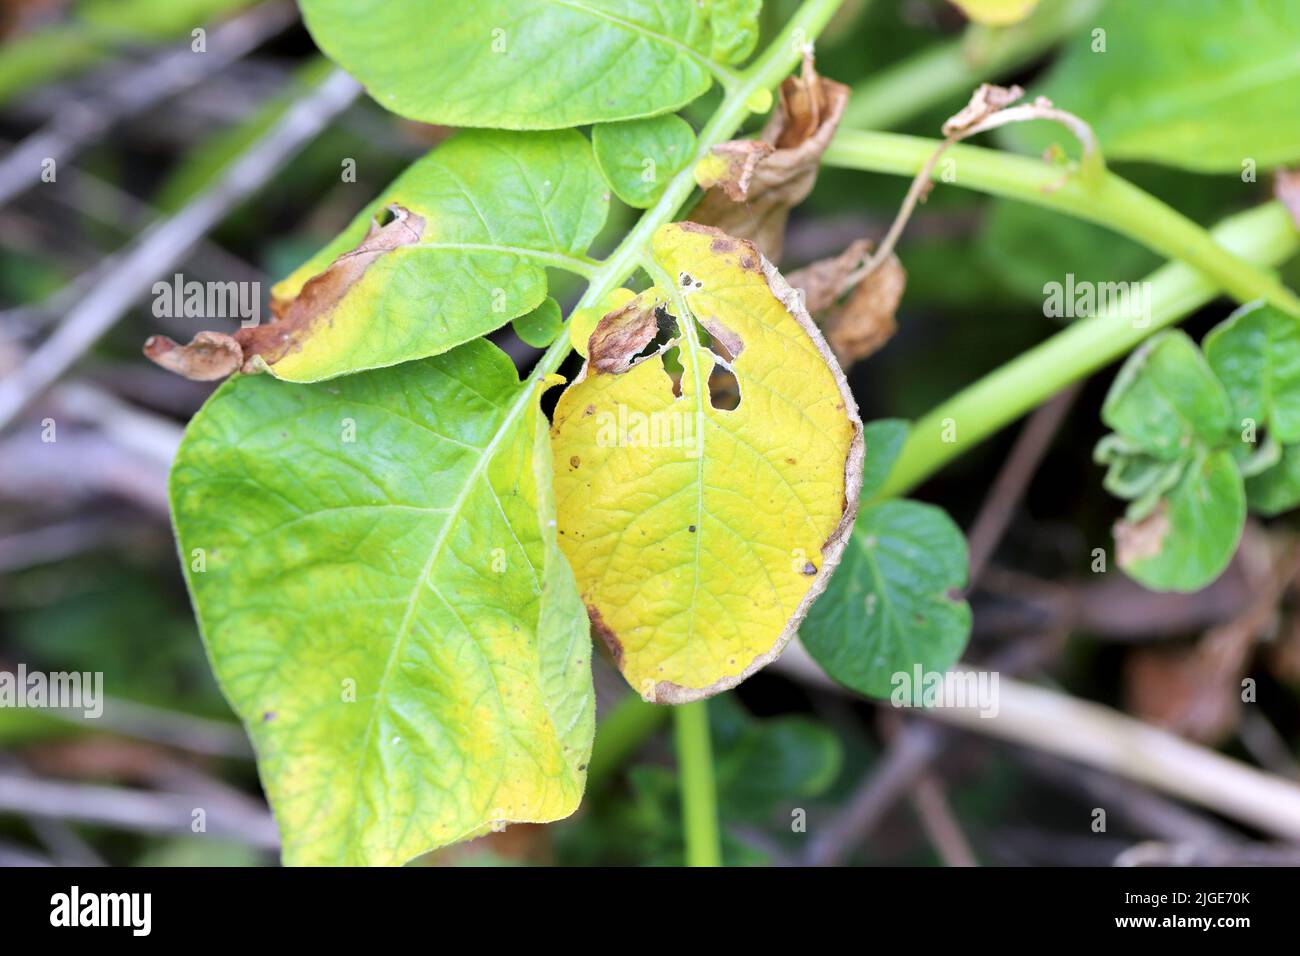 Symptoms of fungal infection of the disease on the potato leaf. Stock Photo